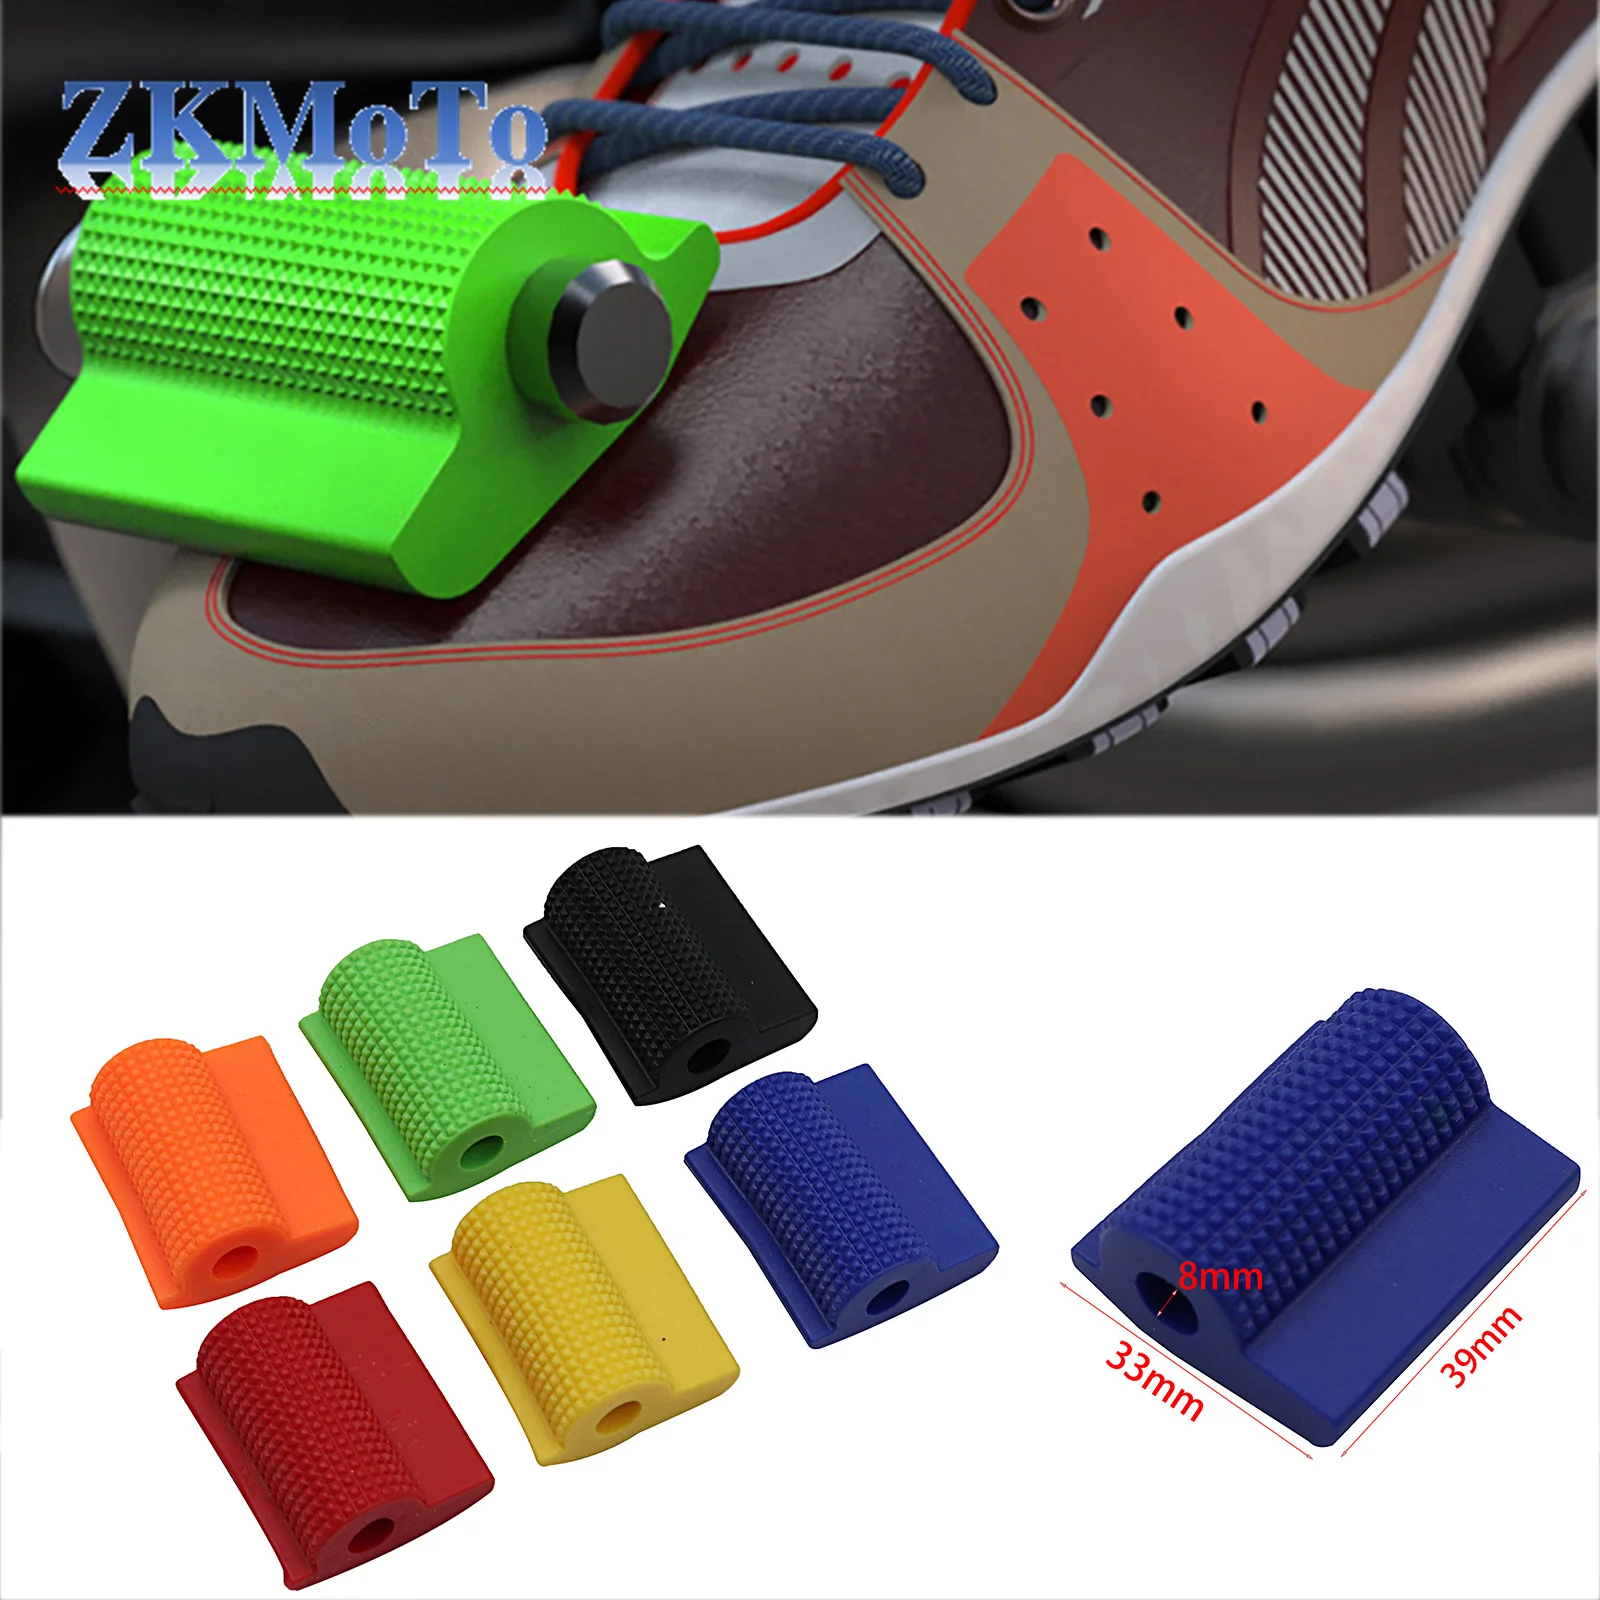 Otorcycle shift gear lever pedal rubber cover shoe protector foot peg toe gel for honda thumb200